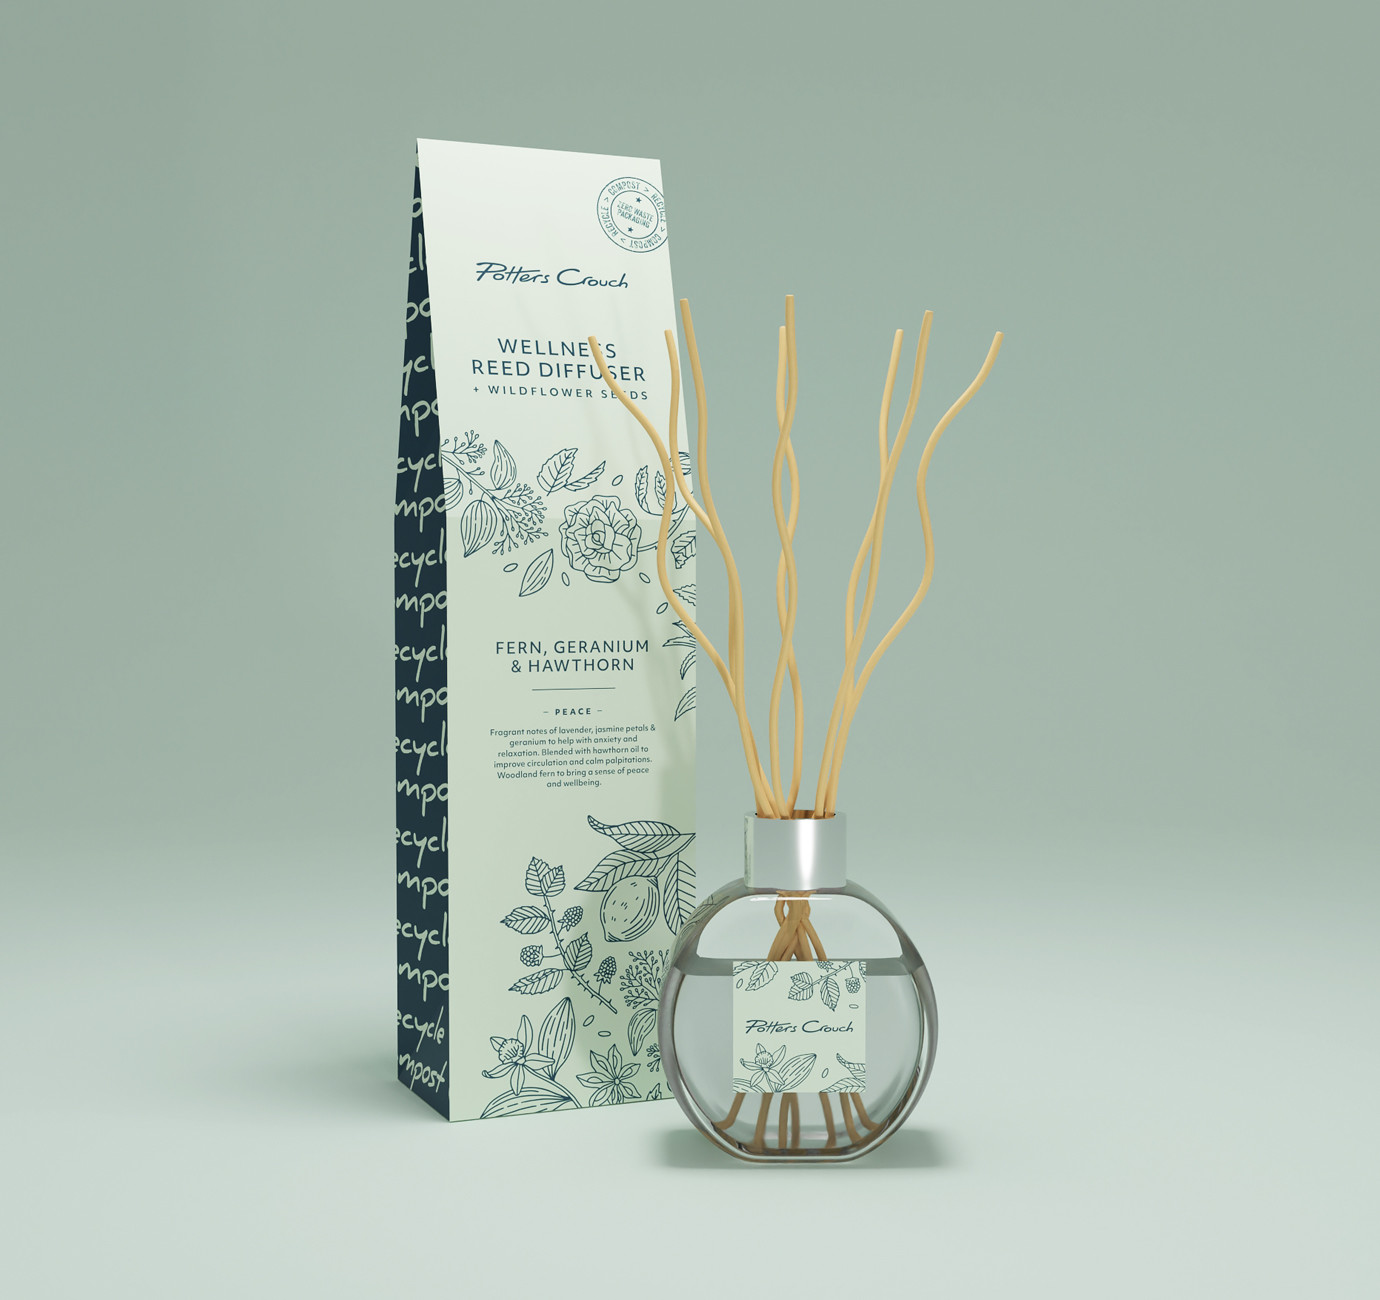 Potters Crouch reed diffuser packaging design by Root Studio